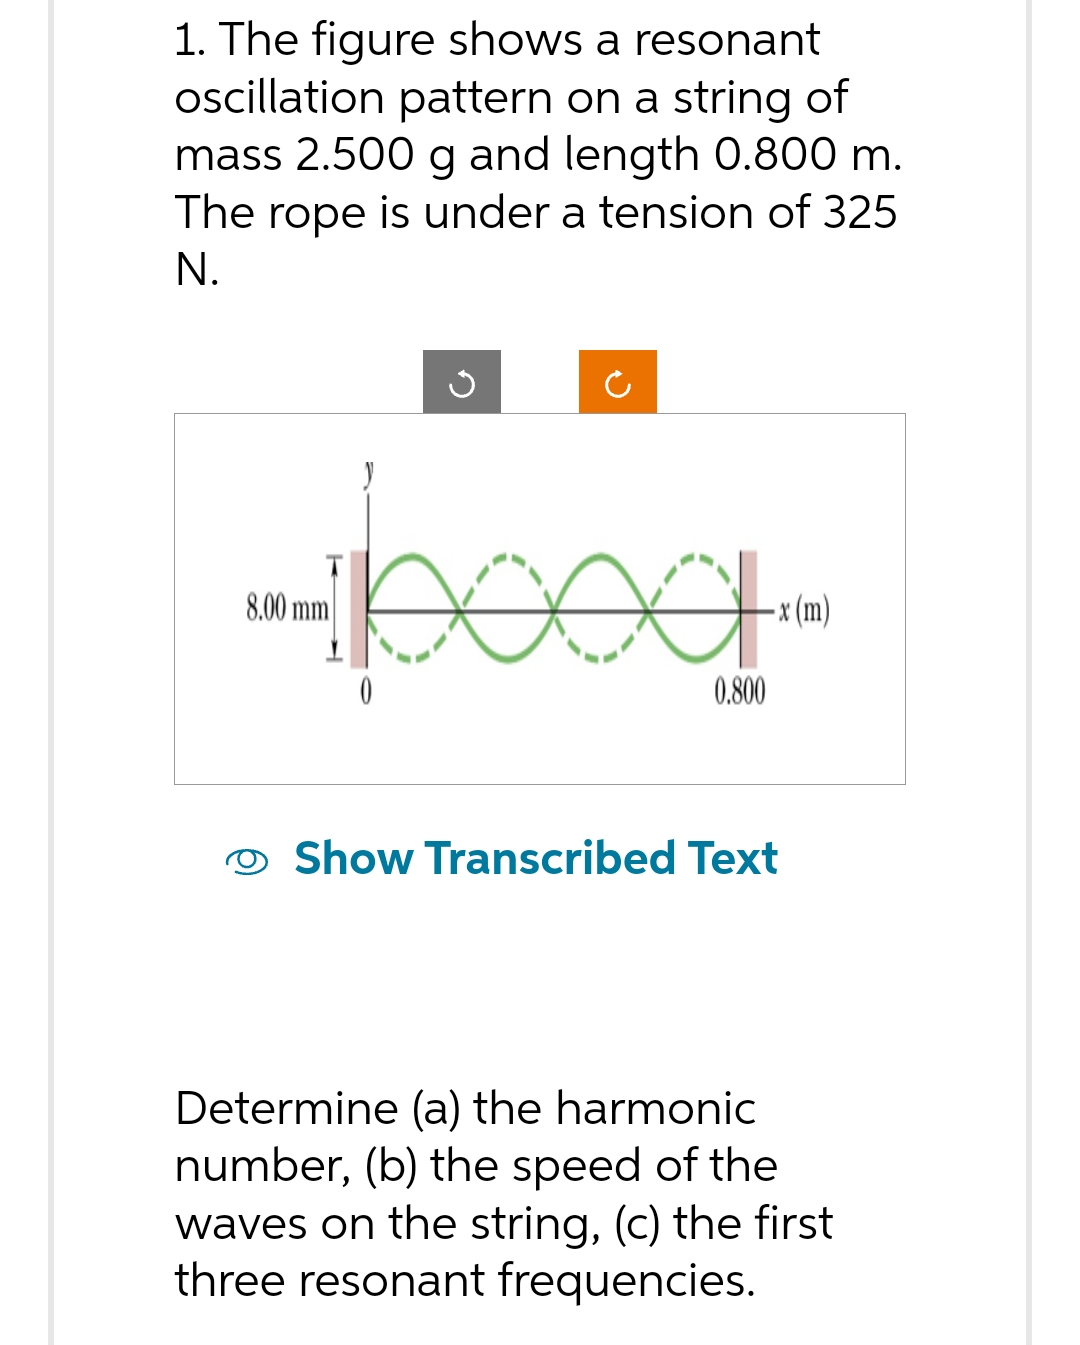 1. The figure shows a resonant
oscillation pattern on a string of
mass 2.500 g and length 0.800 m.
The rope is under a tension of 325
N.
8.00 mm
Ű
pood.
0
-x (m)
0.800
Show Transcribed Text
Determine (a) the harmonic
number, (b) the speed of the
waves on the string, (c) the first
three resonant frequencies.